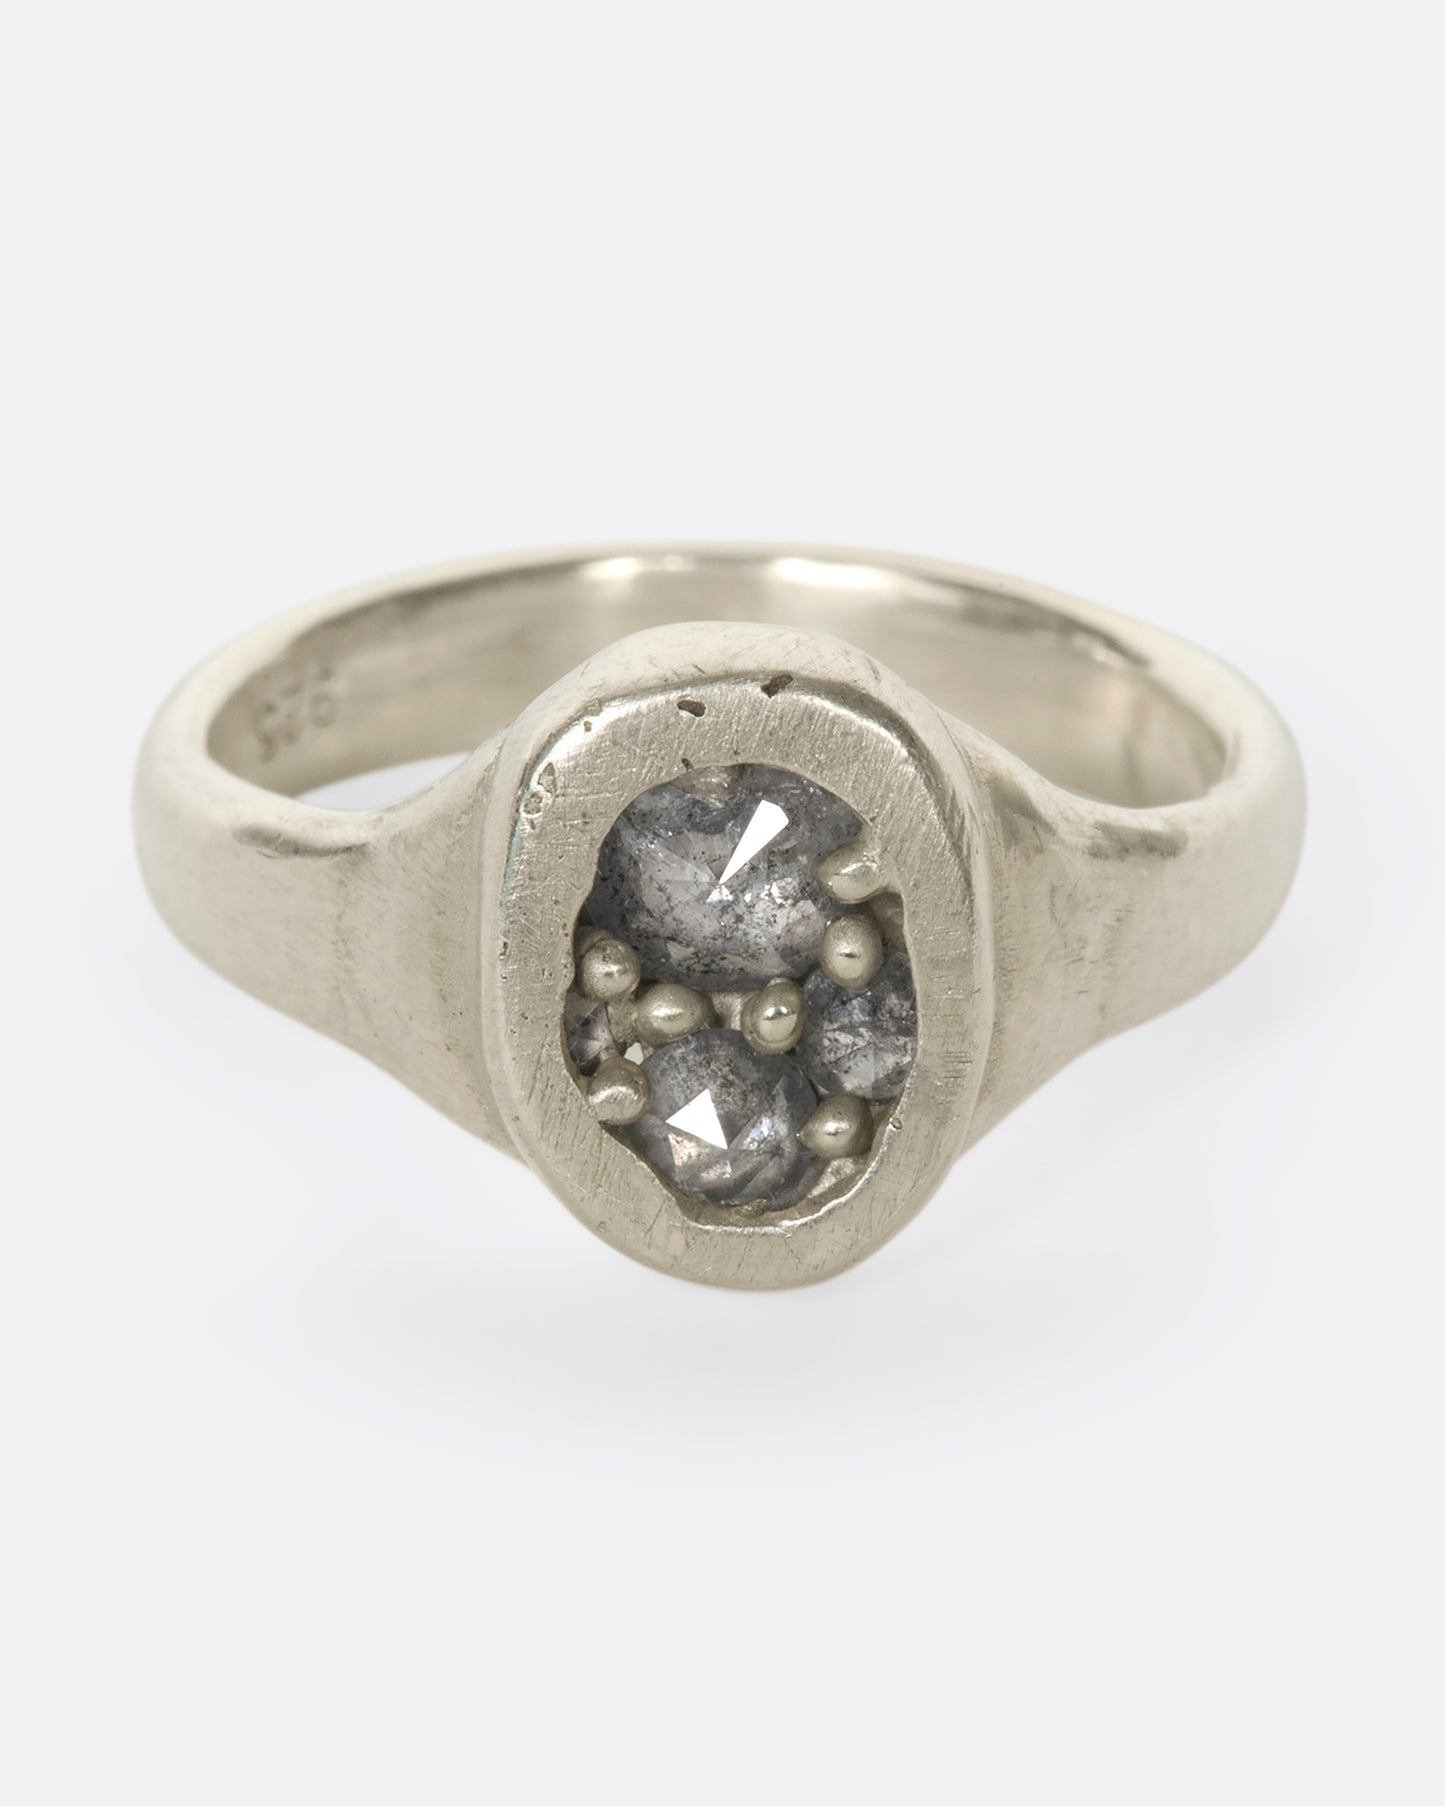 A slightly overhead view of an oval silver ring with grey diamonds.